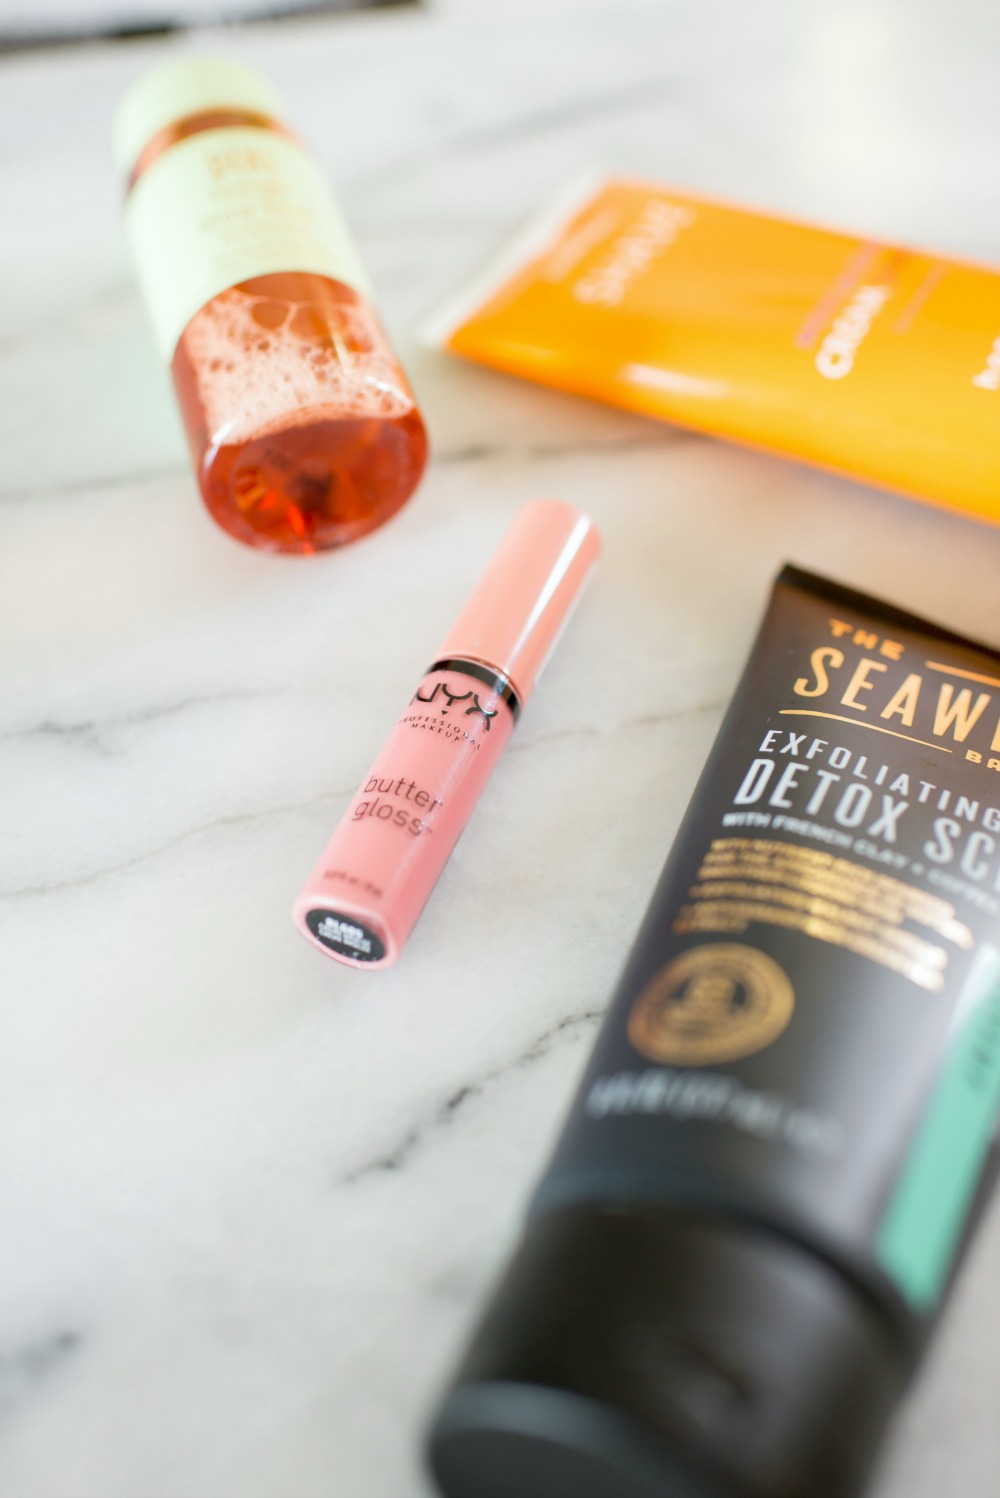 Four Drugstore Beauty Products I'm Loving Right Now featured by popular Florida style blogger The Modern Savvy